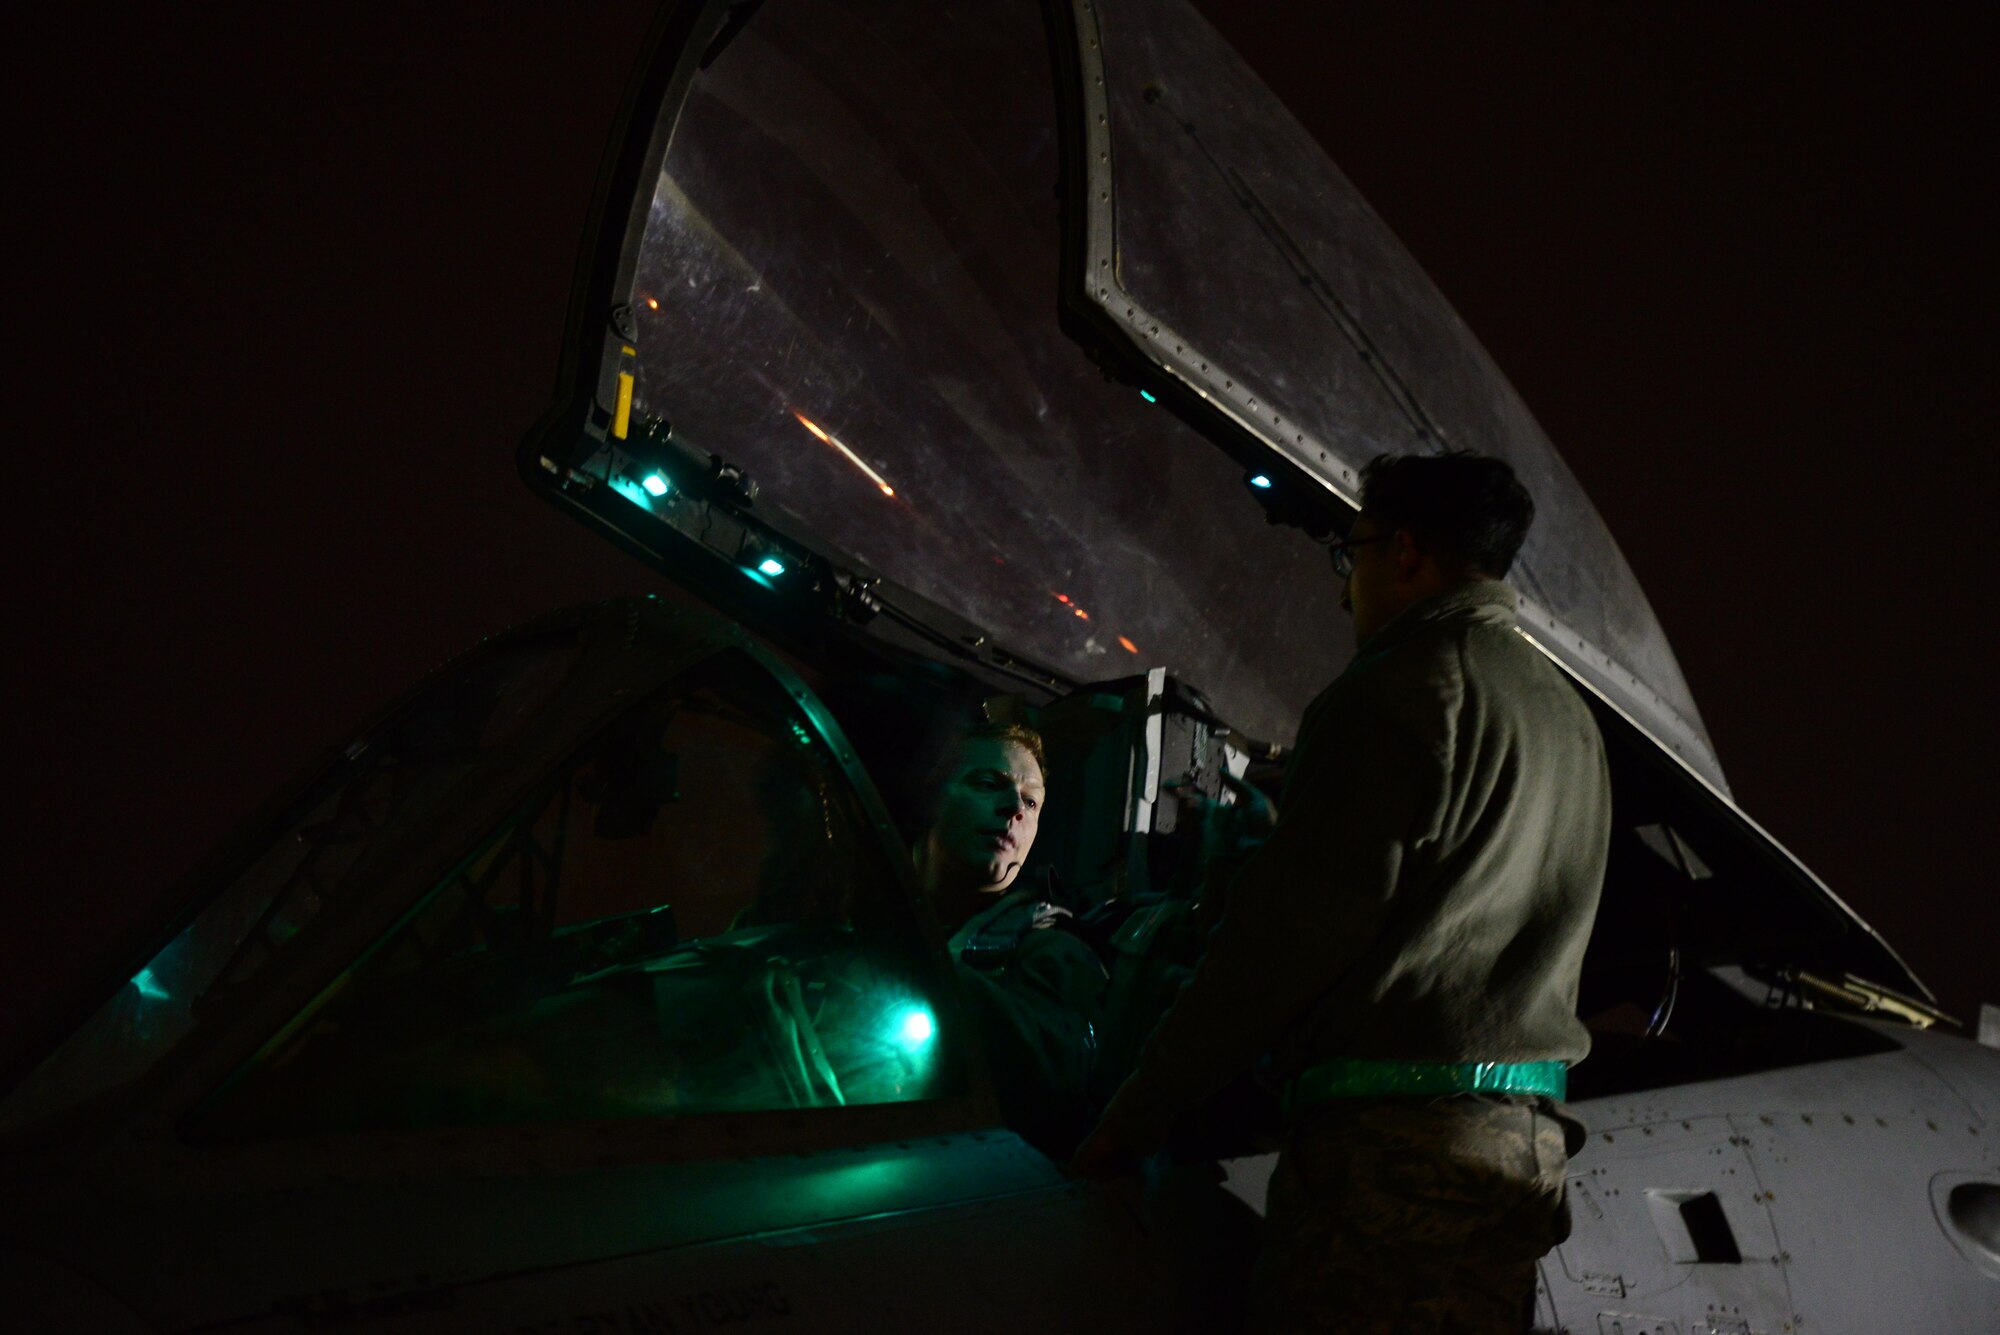 Capt. Kris 'Nimitz' Elmstedt, 25th Fighter Squadron A-10 Thunderbolt II pilot, returns from a mission during the first night of Vigilant Ace 16 at Osan Air Base, Republic of Korea, Nov. 2, 2015. Vigilant Ace is a peninusla wide operational readiness exercise geared toward increasing the interoperability neccessary to maintain the Mutual Defense Treaty between the ROK and the U.S.
(U.S. Air For,ce photo/Staff Sgt. Amber Grimm)